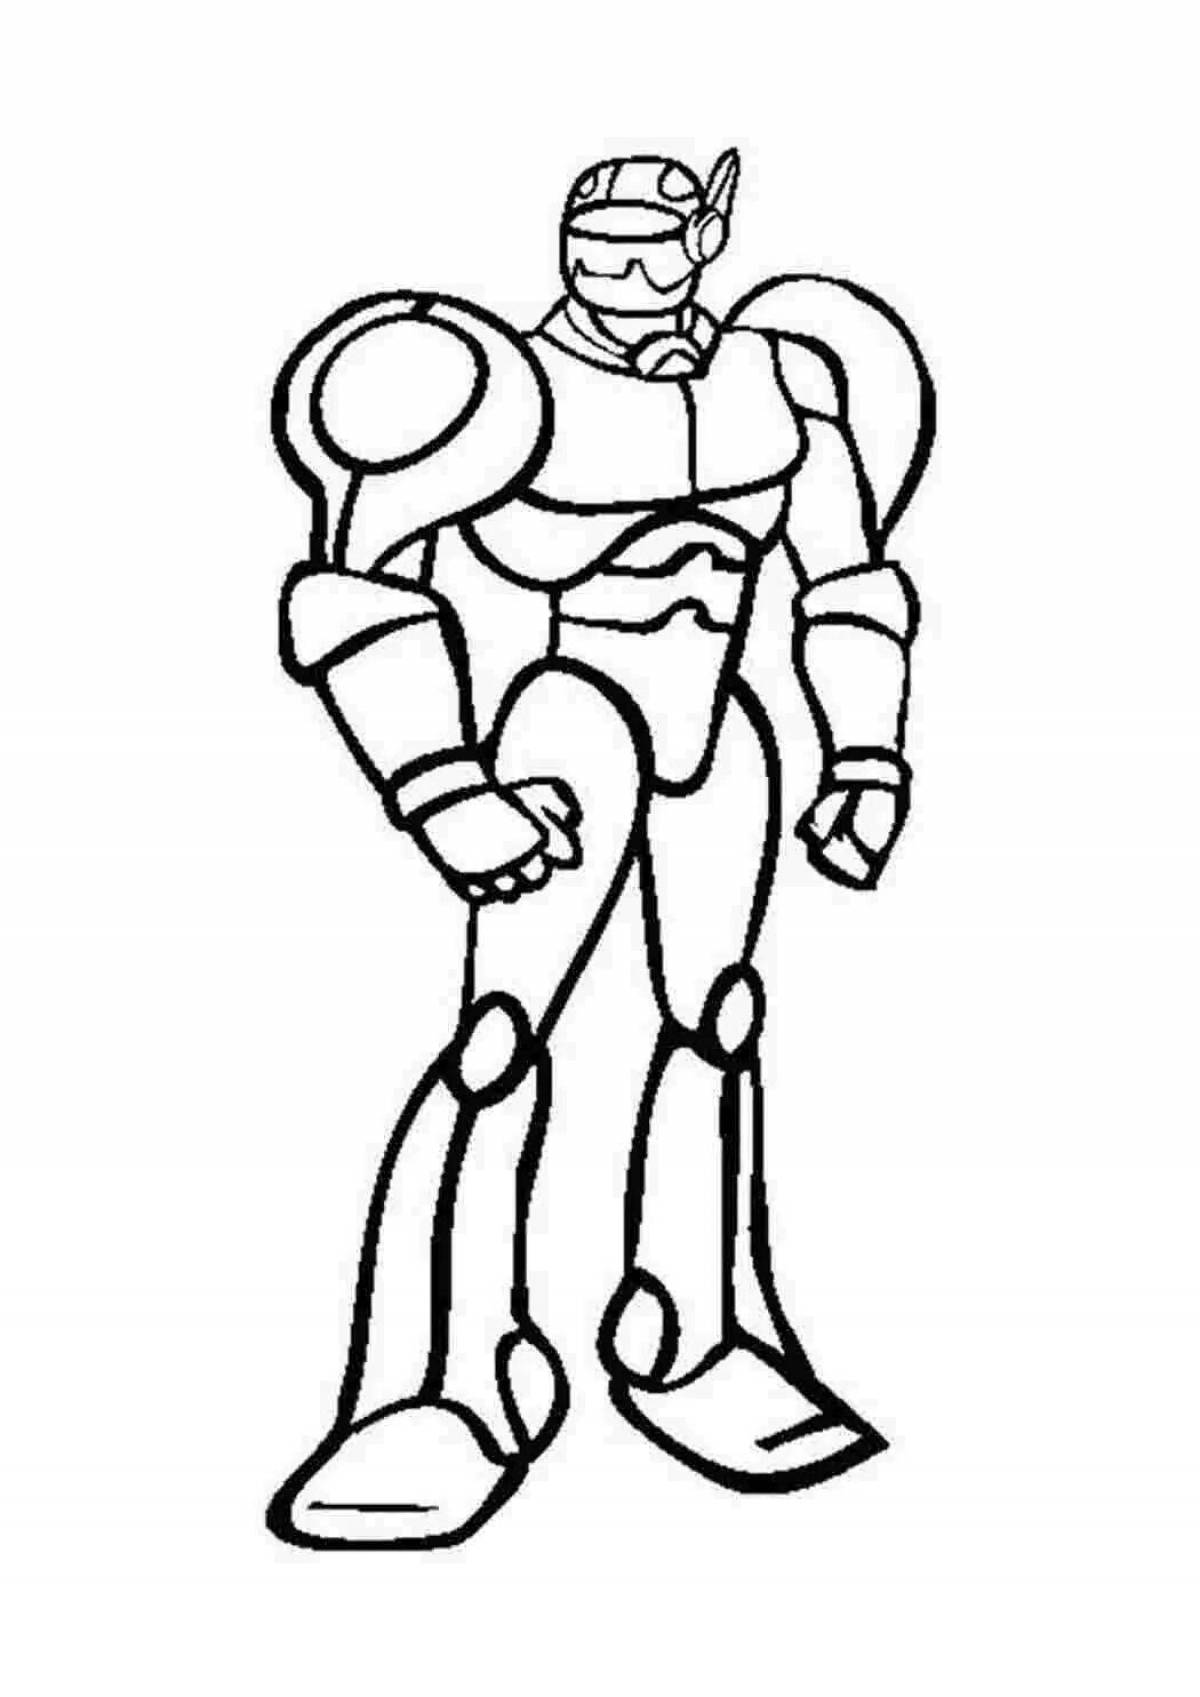 Coloring pages with playful robots for children 5-7 years old